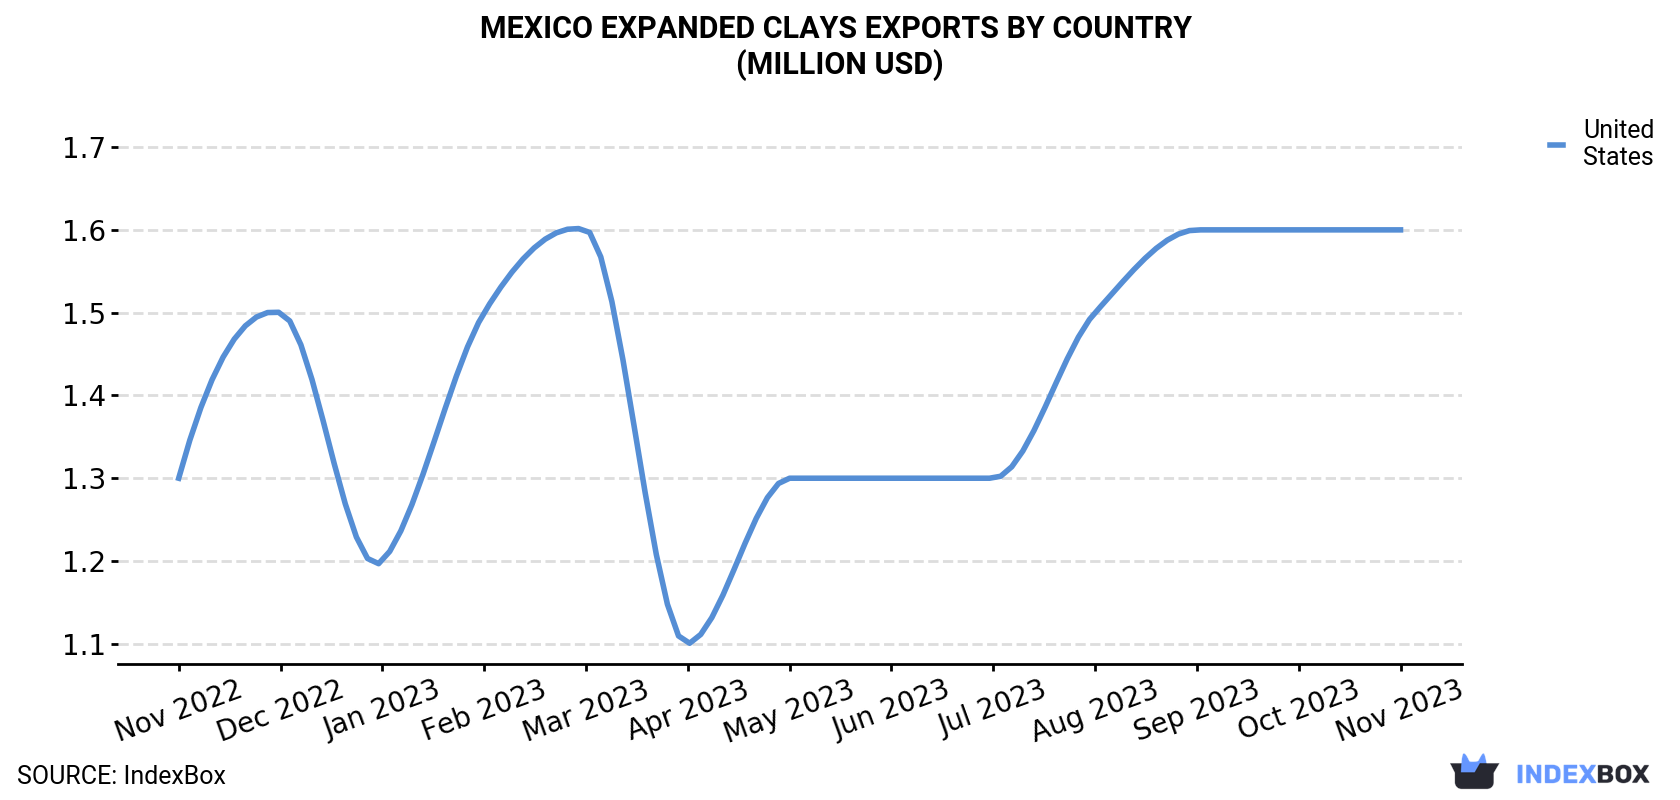 Mexico Expanded Clays Exports By Country (Million USD)